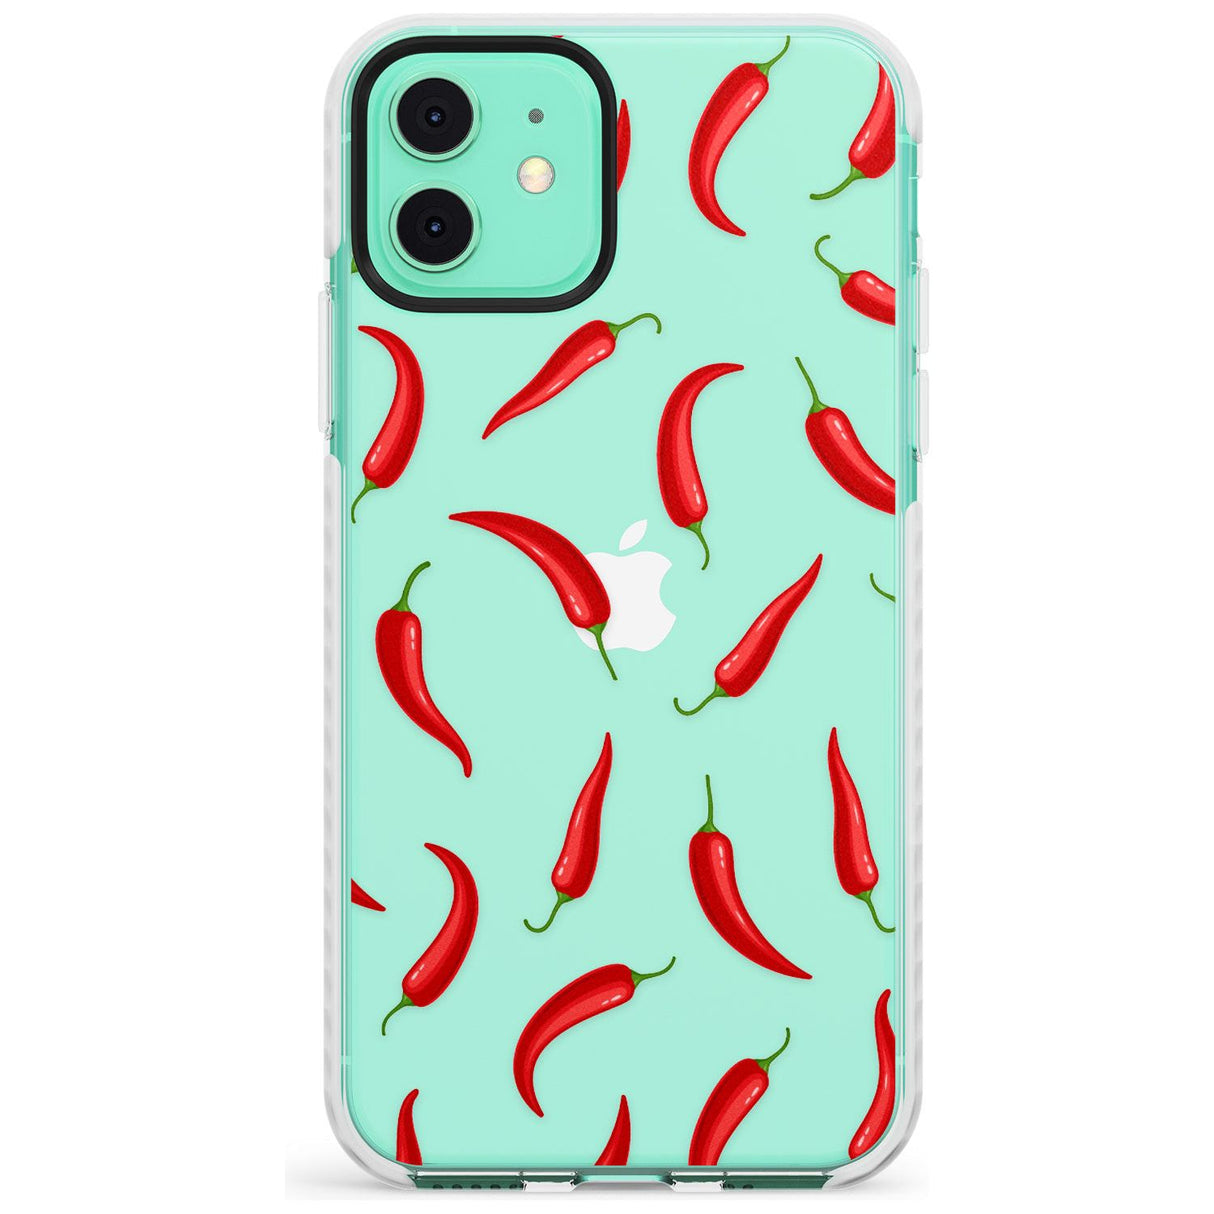 Chilly Pattern Impact Phone Case for iPhone 11